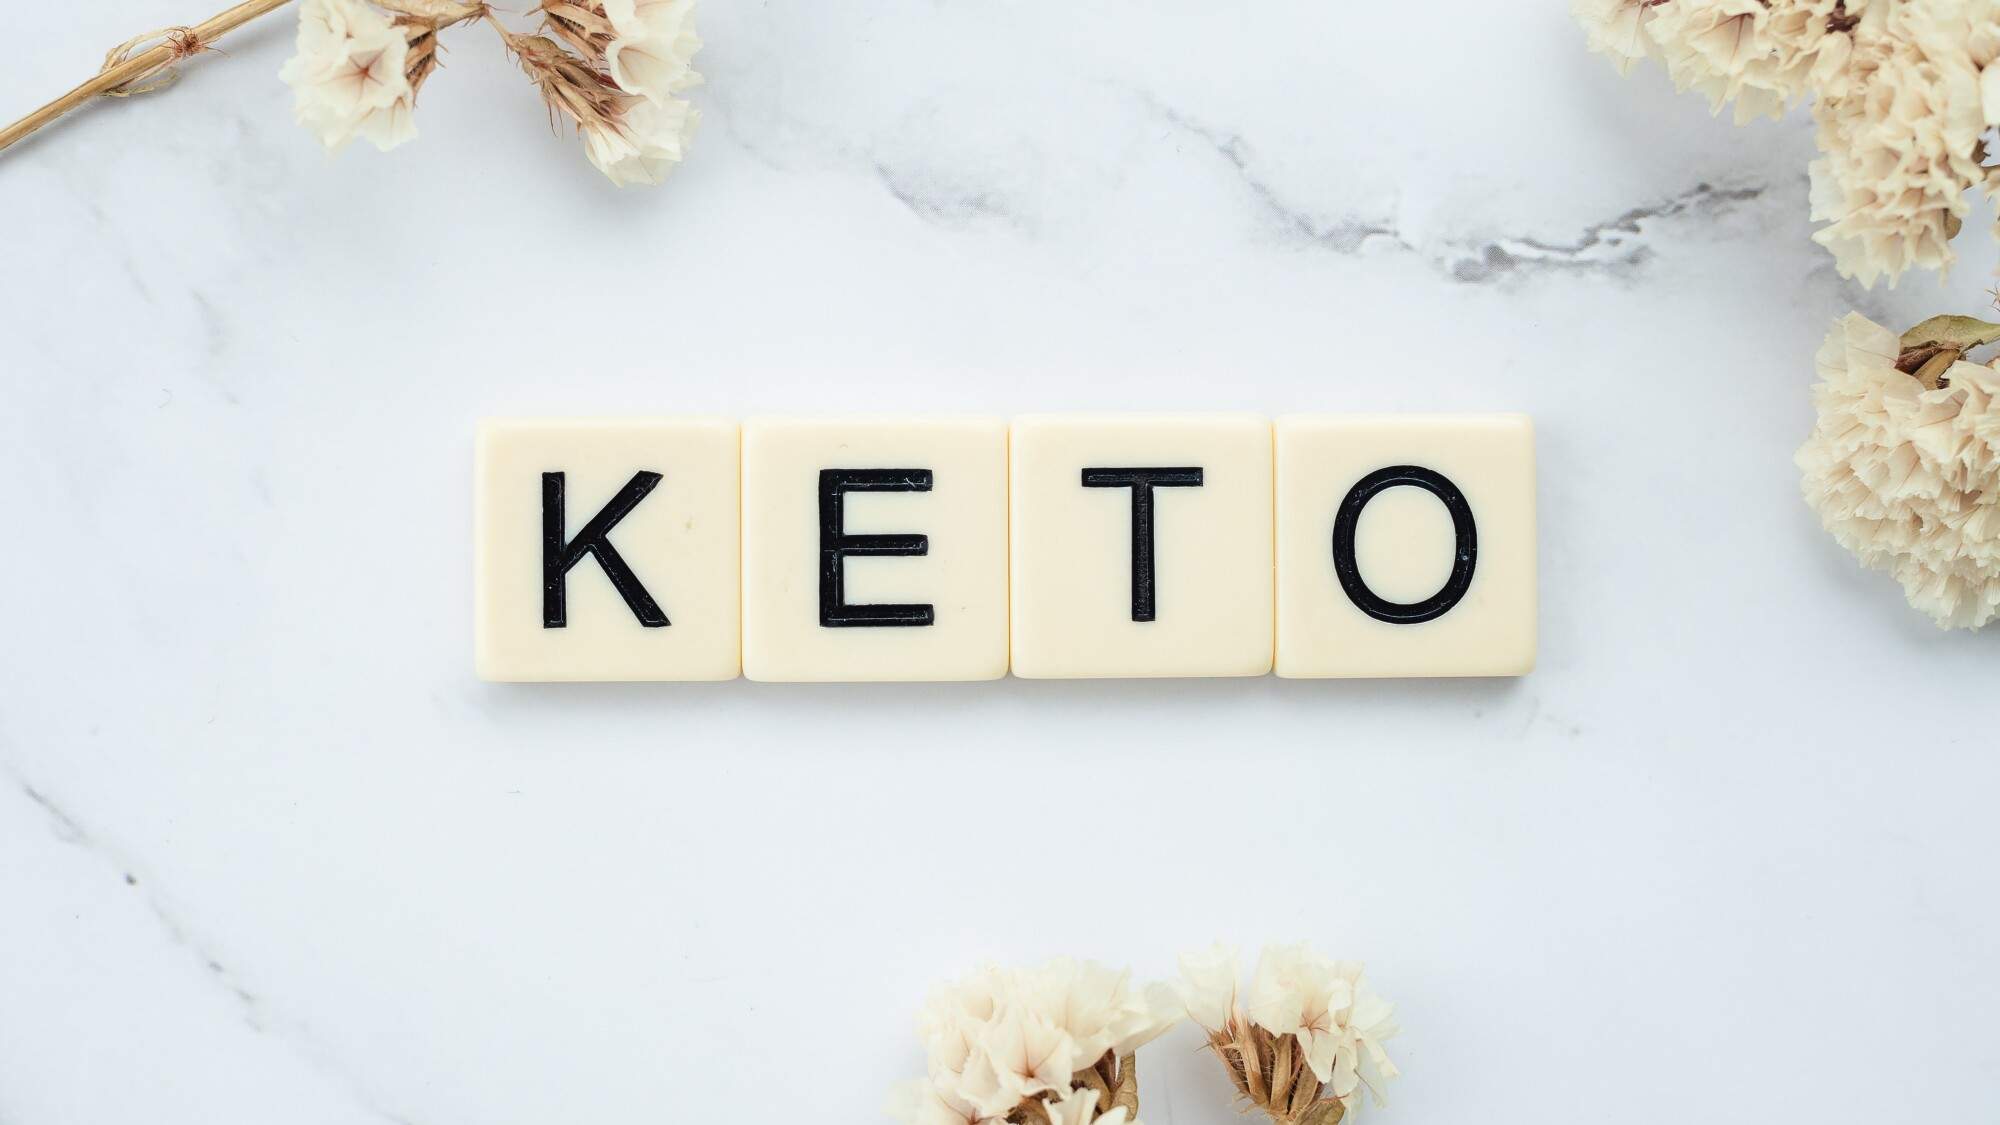 6 Low-Carb Snack Ideas for the Keto Diet